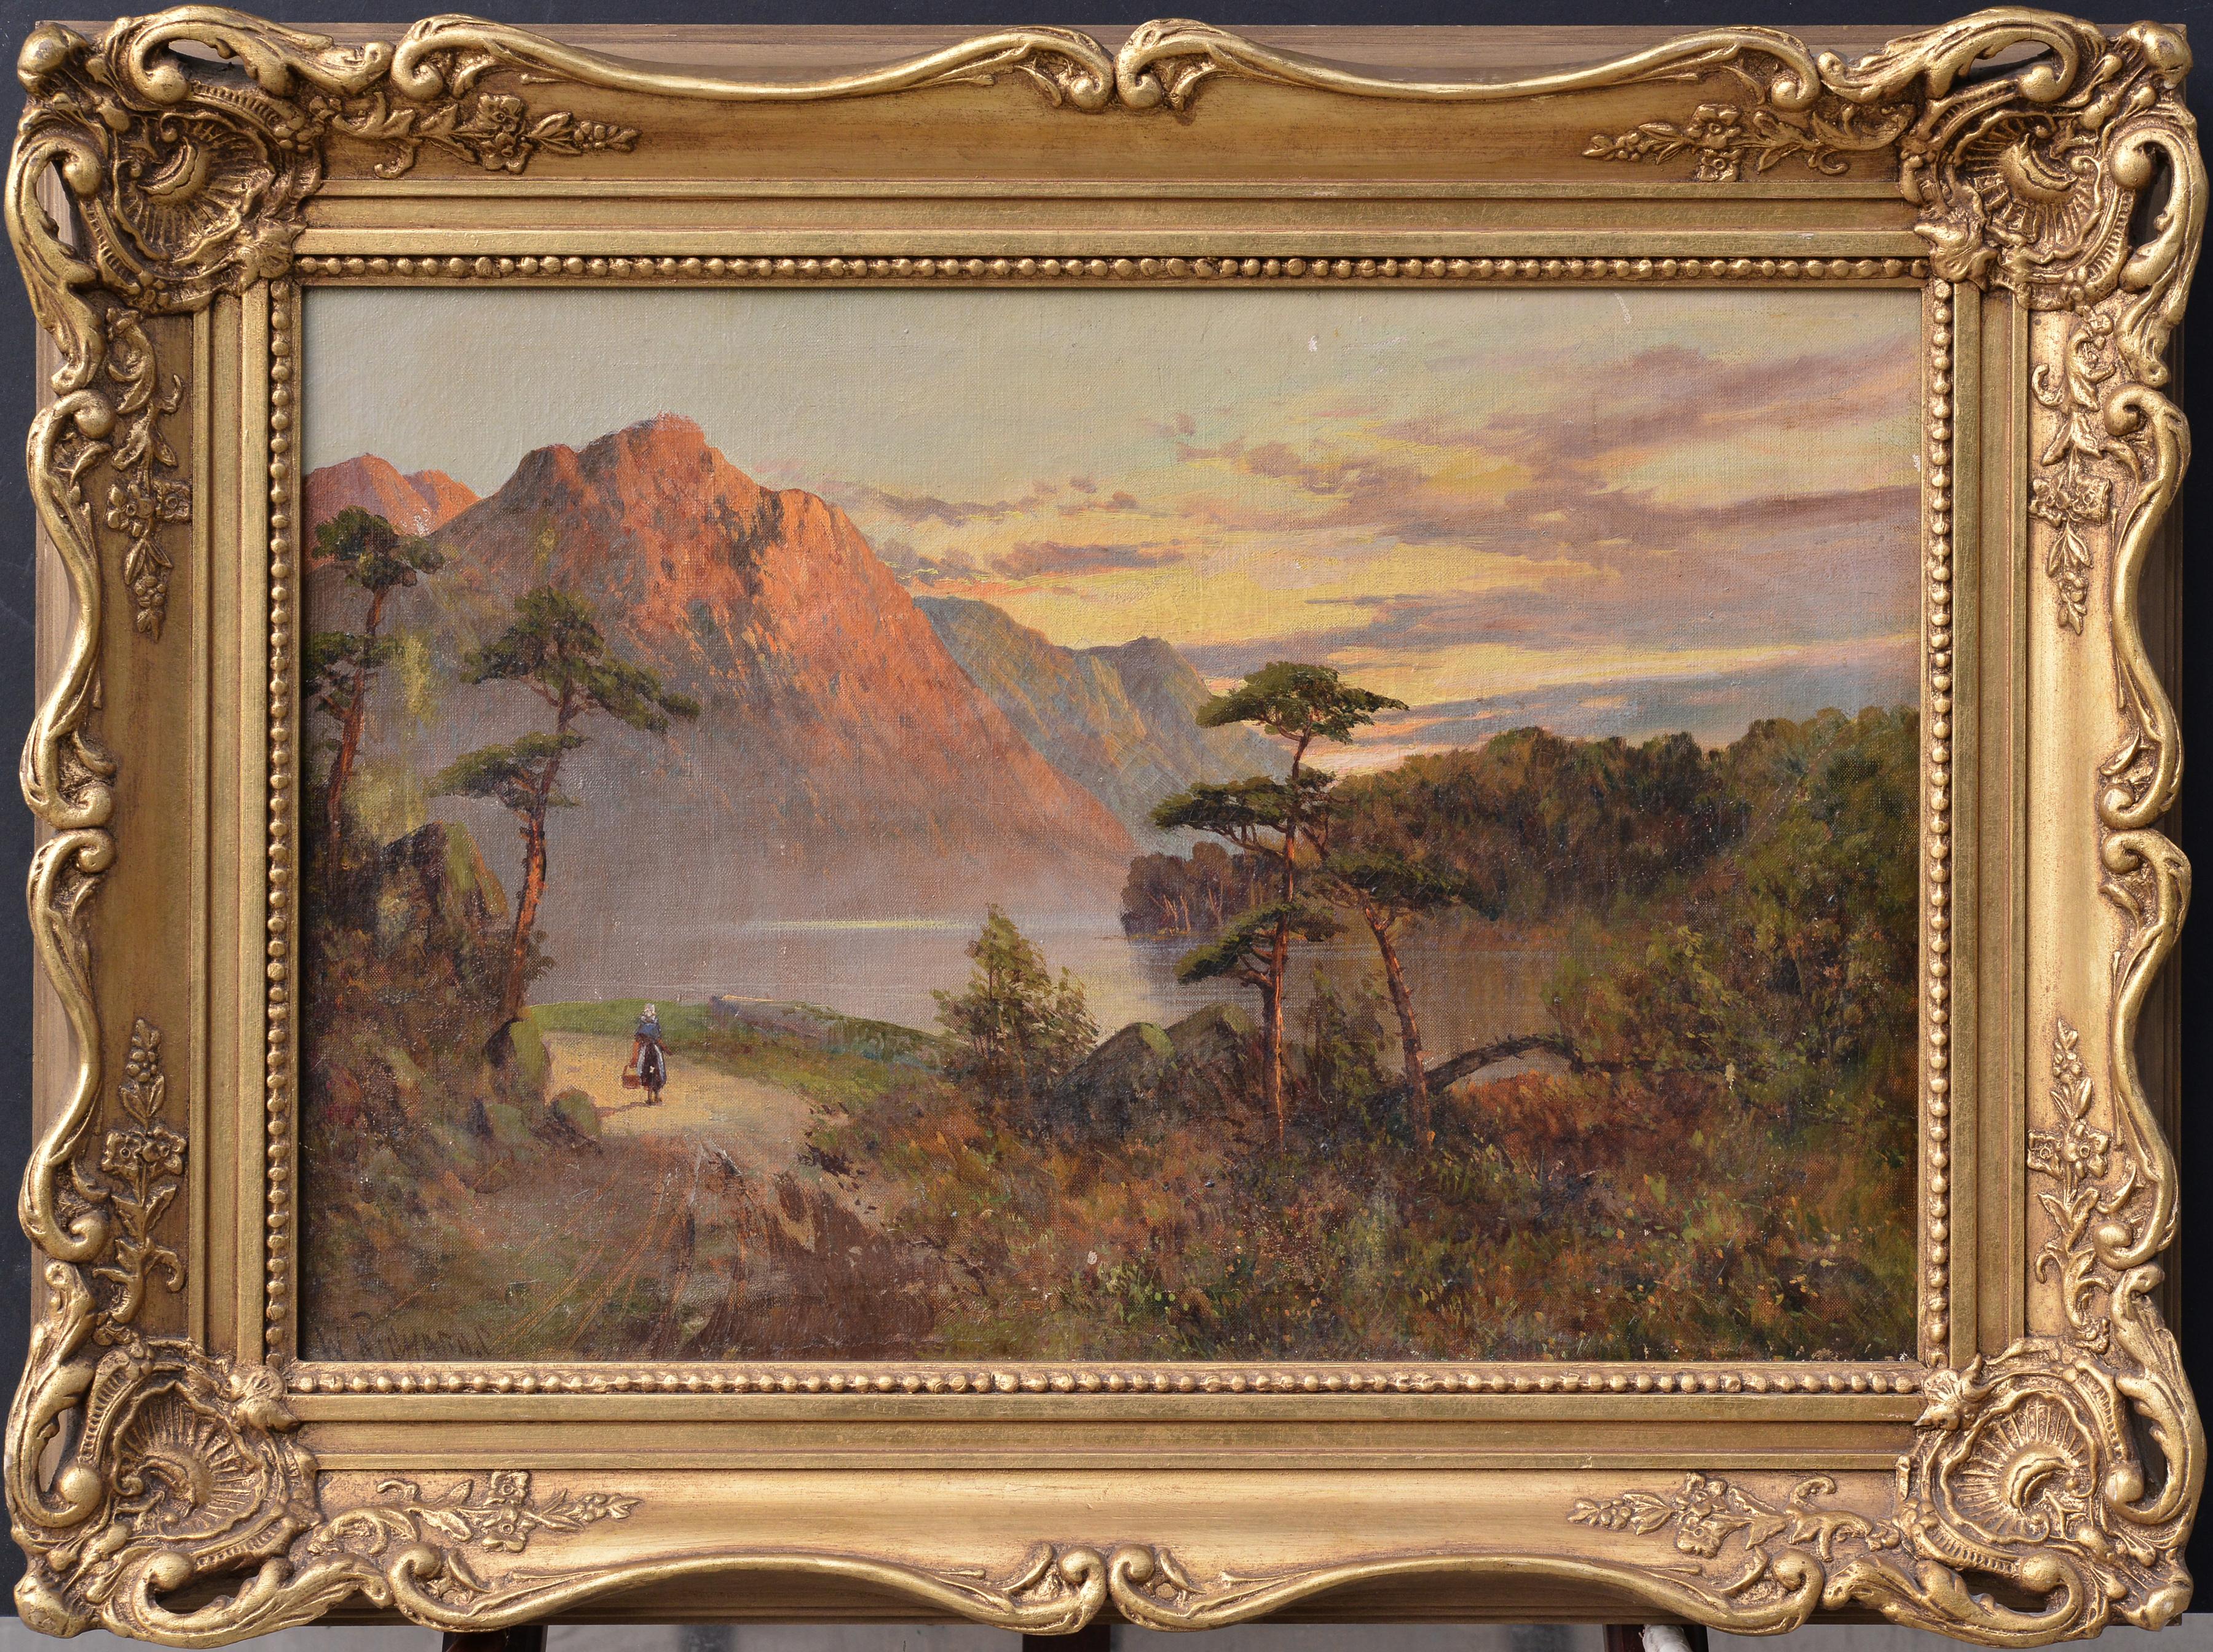 Unknown Landscape Painting - British highlands Loch on Sunset 19th century Landscape Framed Oil Painting 